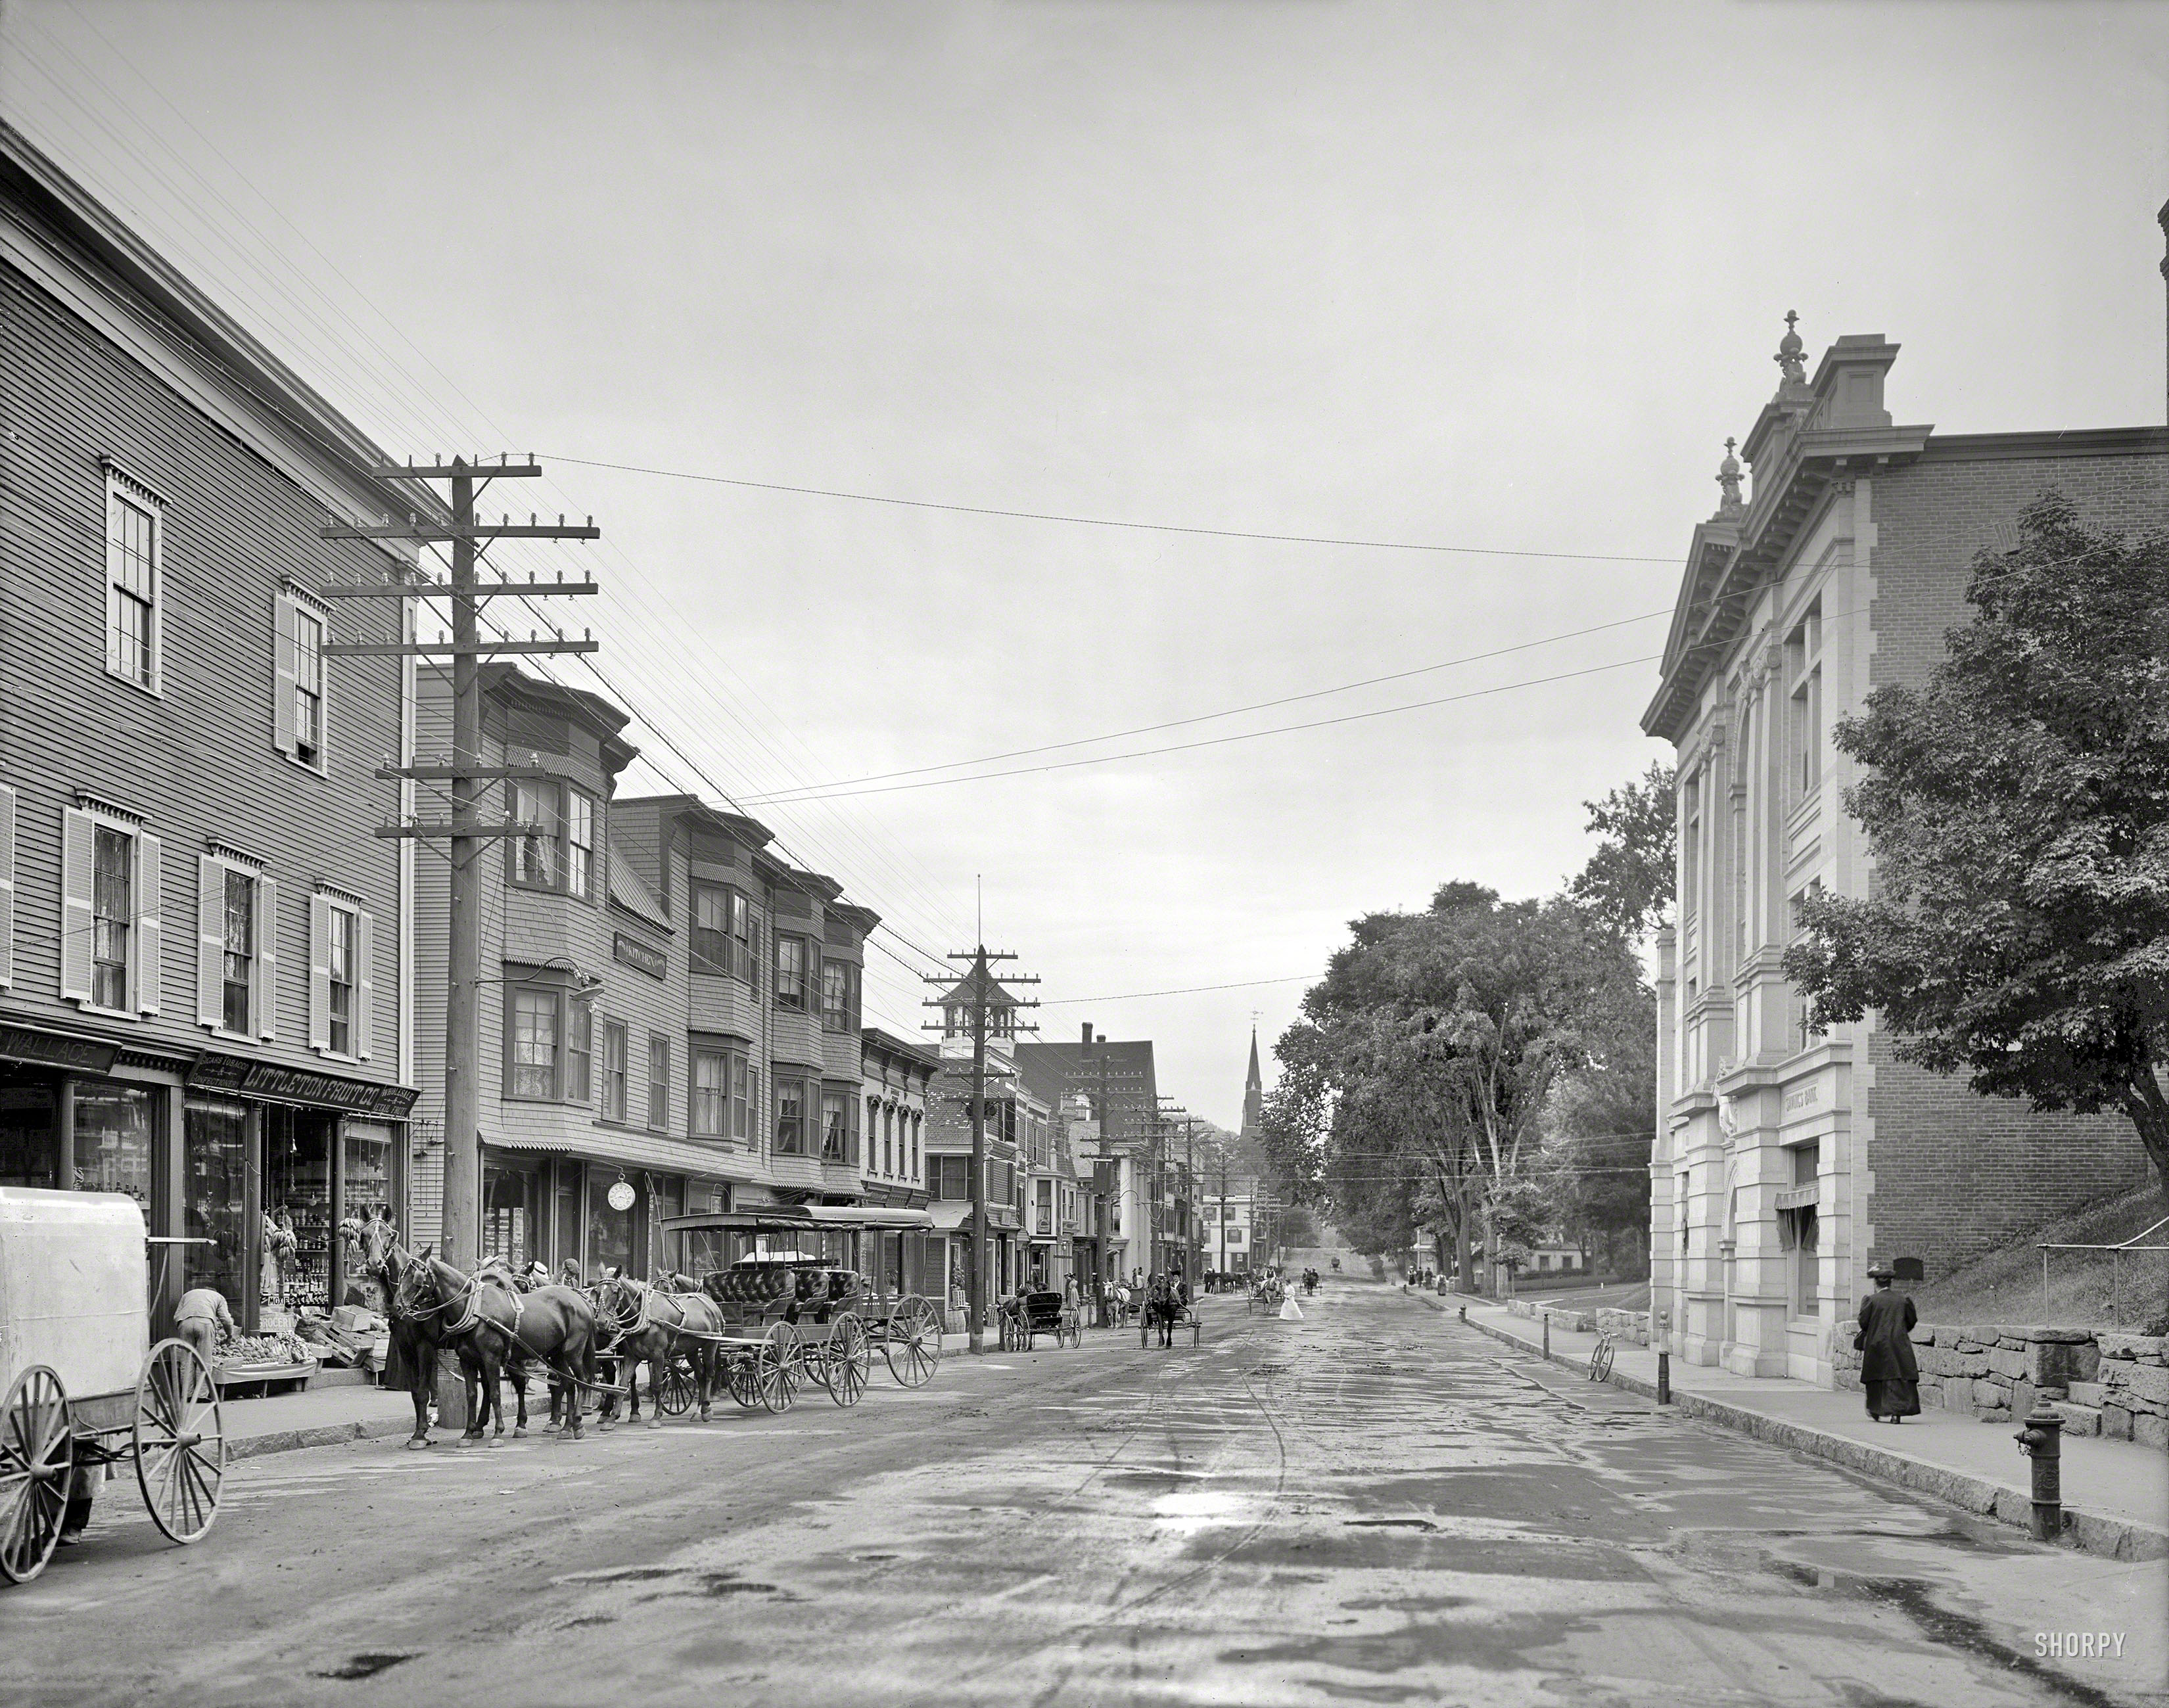 Circa 1908. "Main Street -- Littleton, New Hampshire." Yes, they have bananas, and Moxie, too. 8x10 glass negative, Detroit Publishing Co. View full size.